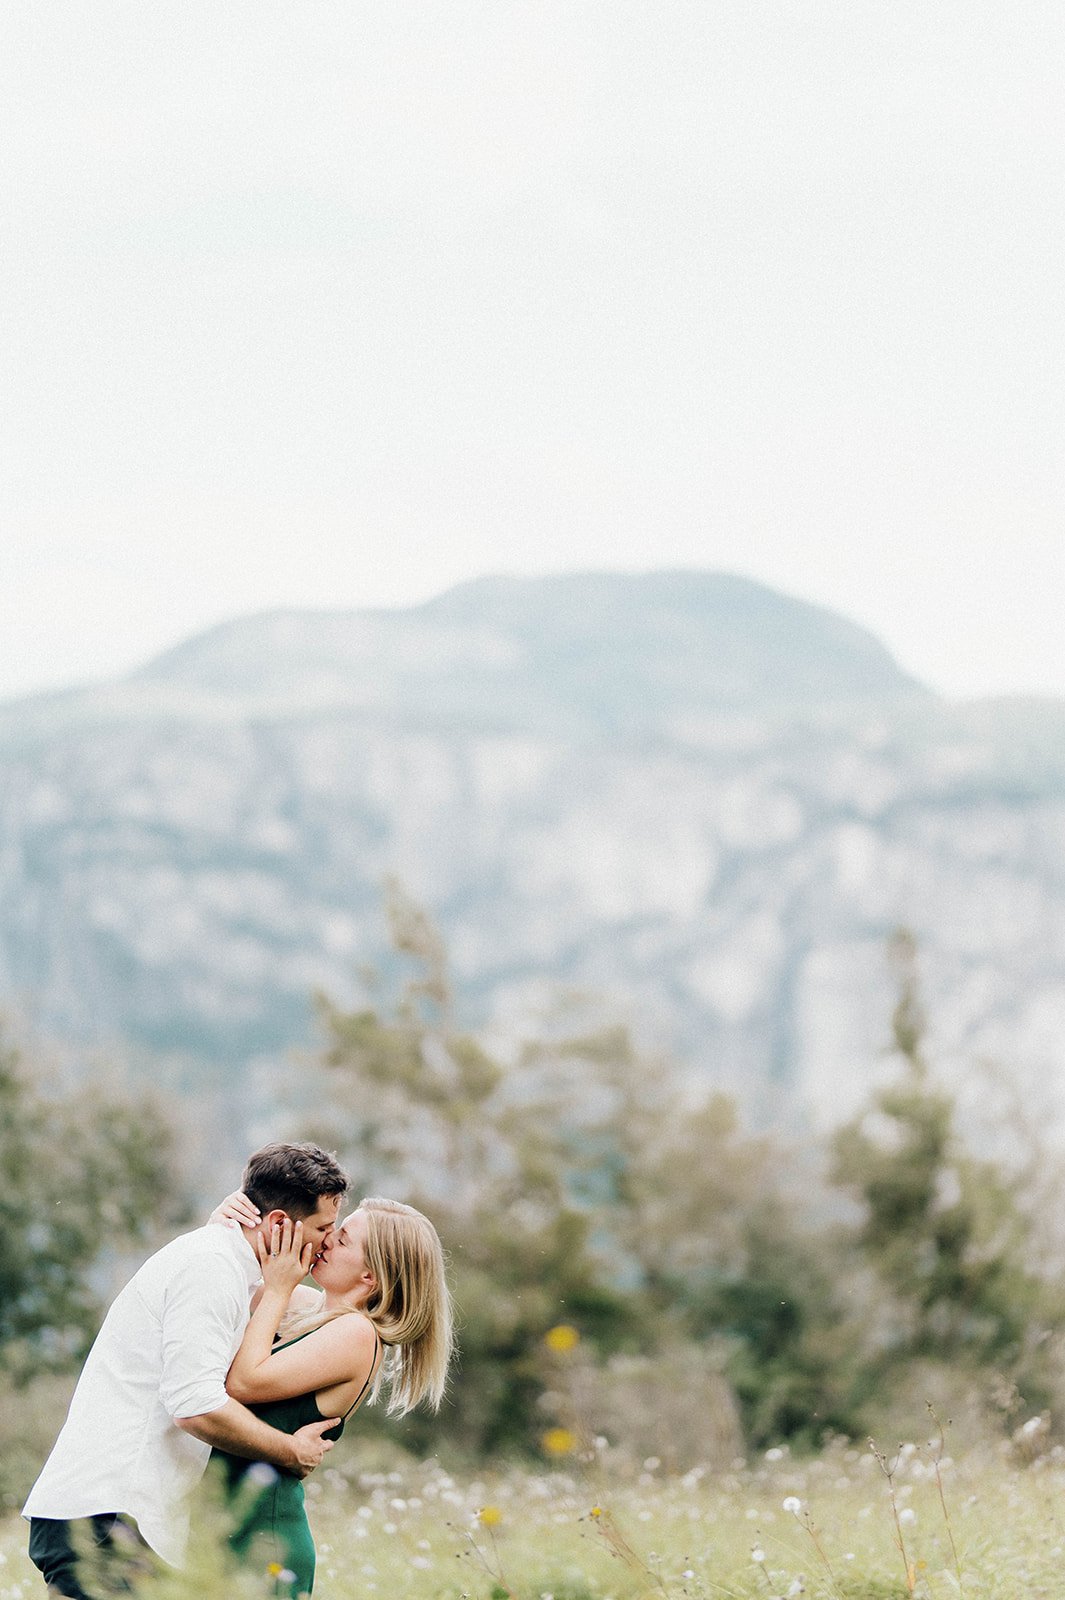 A young and beautiful engaged couple passionately kiss in a grassy field in front of a large mountain in Squamish, BC.